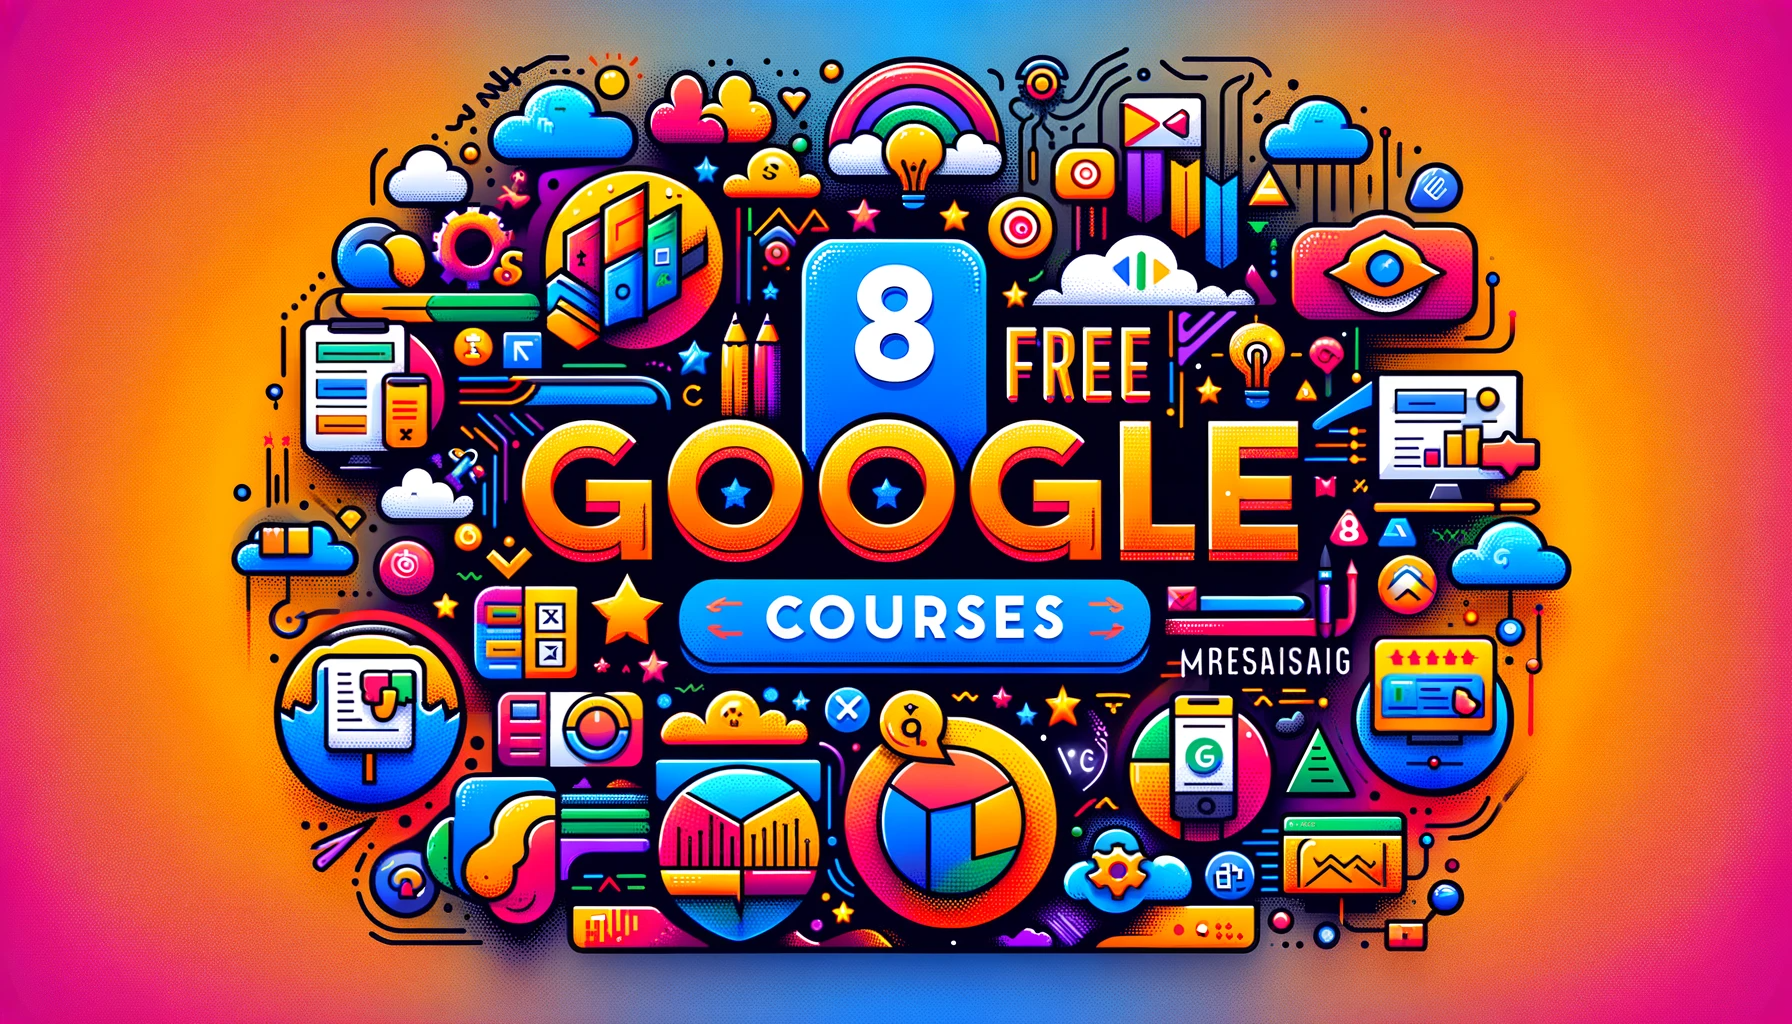 8 free Google courses to get better paying jobs